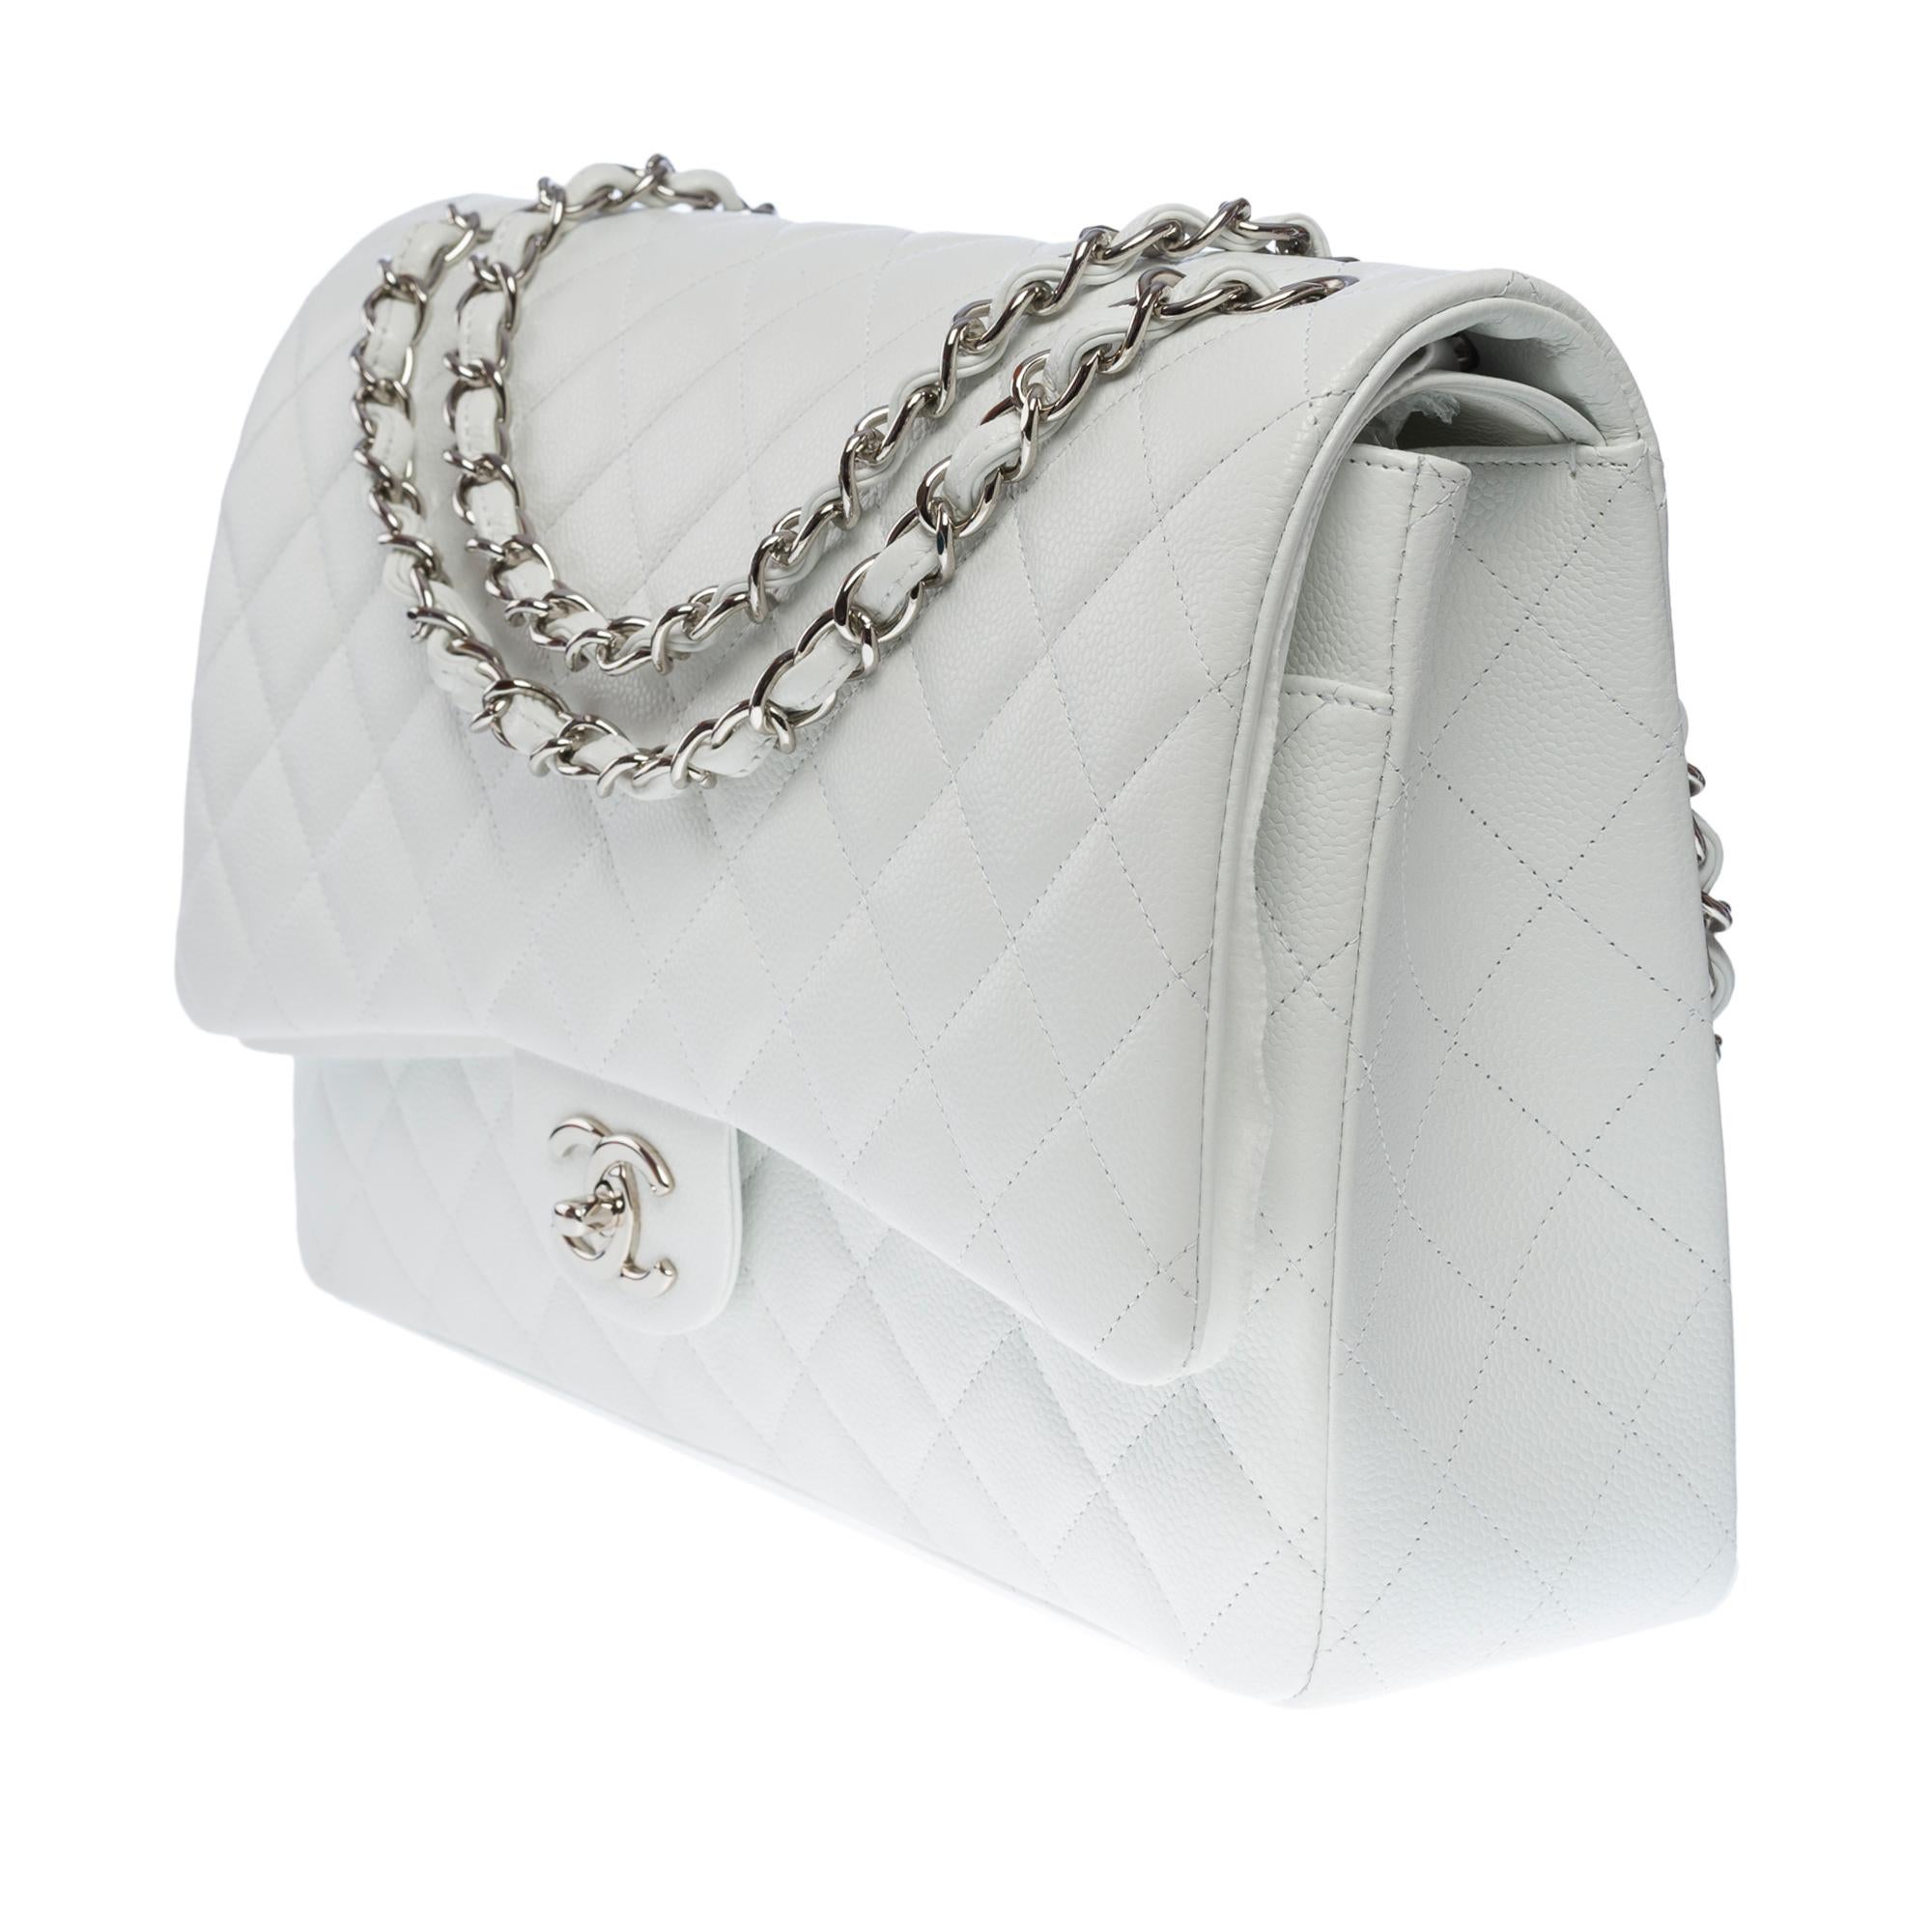 Women's Chanel Timeless Maxi Jumbo shoulder bag in White quilted caviar leather, SHW